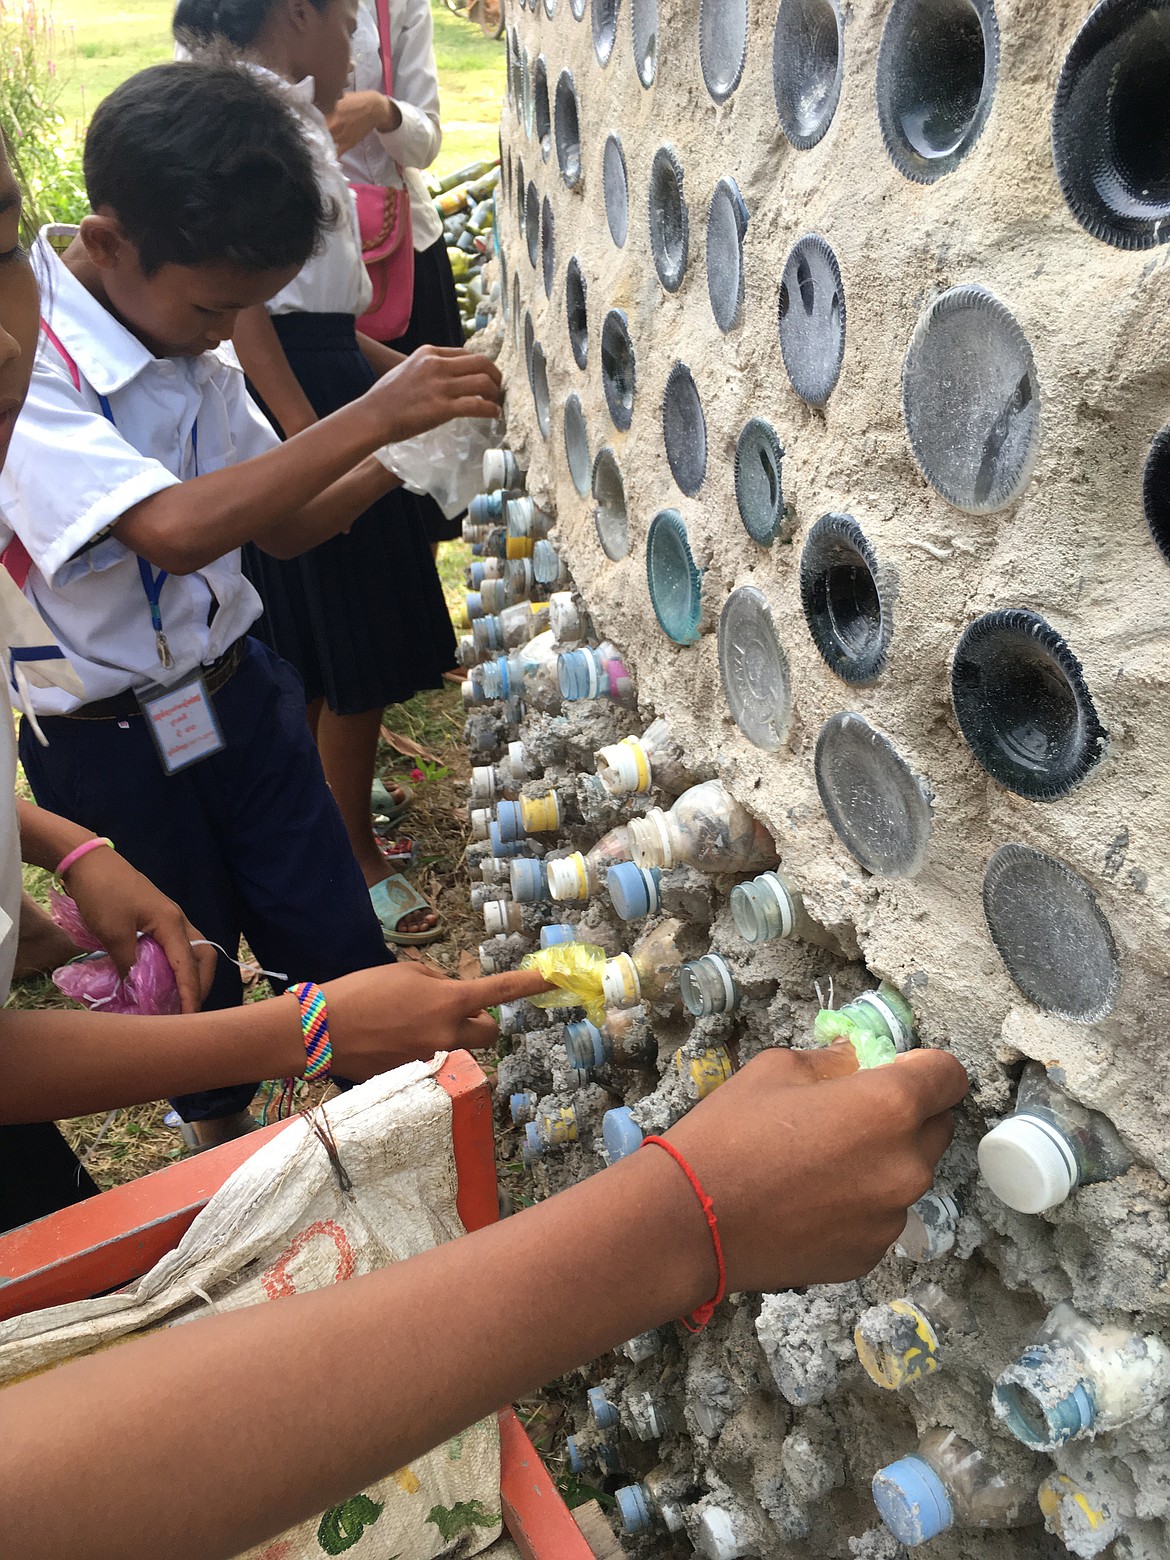 Students stuff plastic bags into plastic bottles used in building construction at the Red Road Foundation school campus in Cambodia.